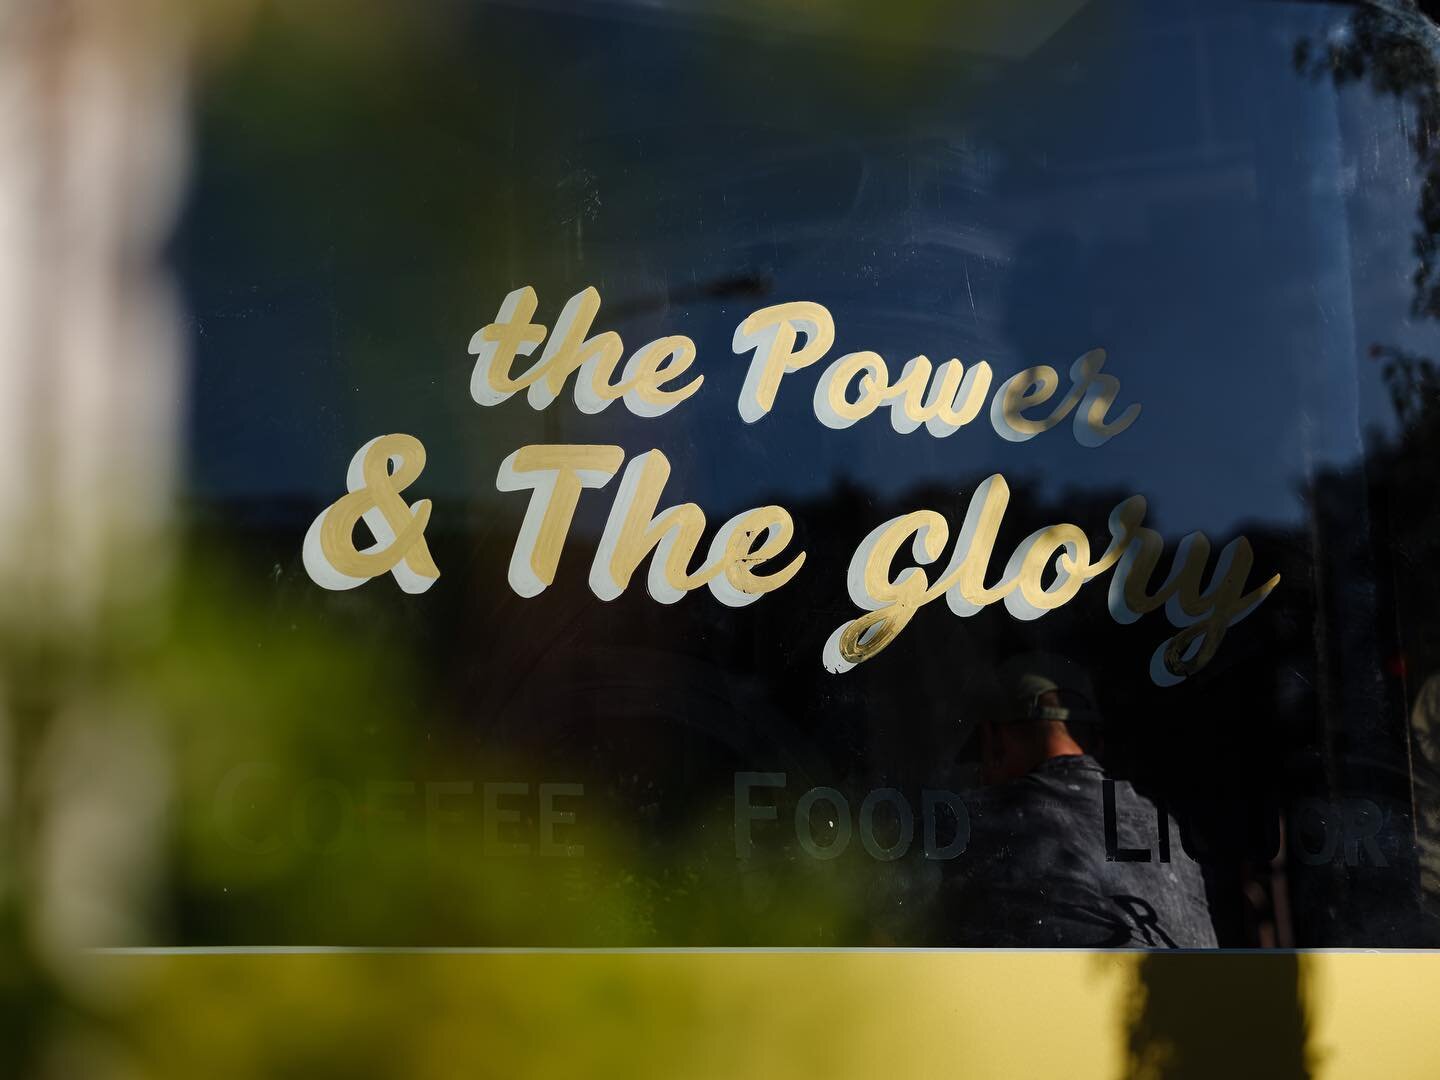 A very Happy Mother&rsquo;s Day to all the Moms&hellip;

@thepowerandtheglory #thepowerandtheglory #cafe #bar #restaurant #capetown #southafrica @all.yours.co